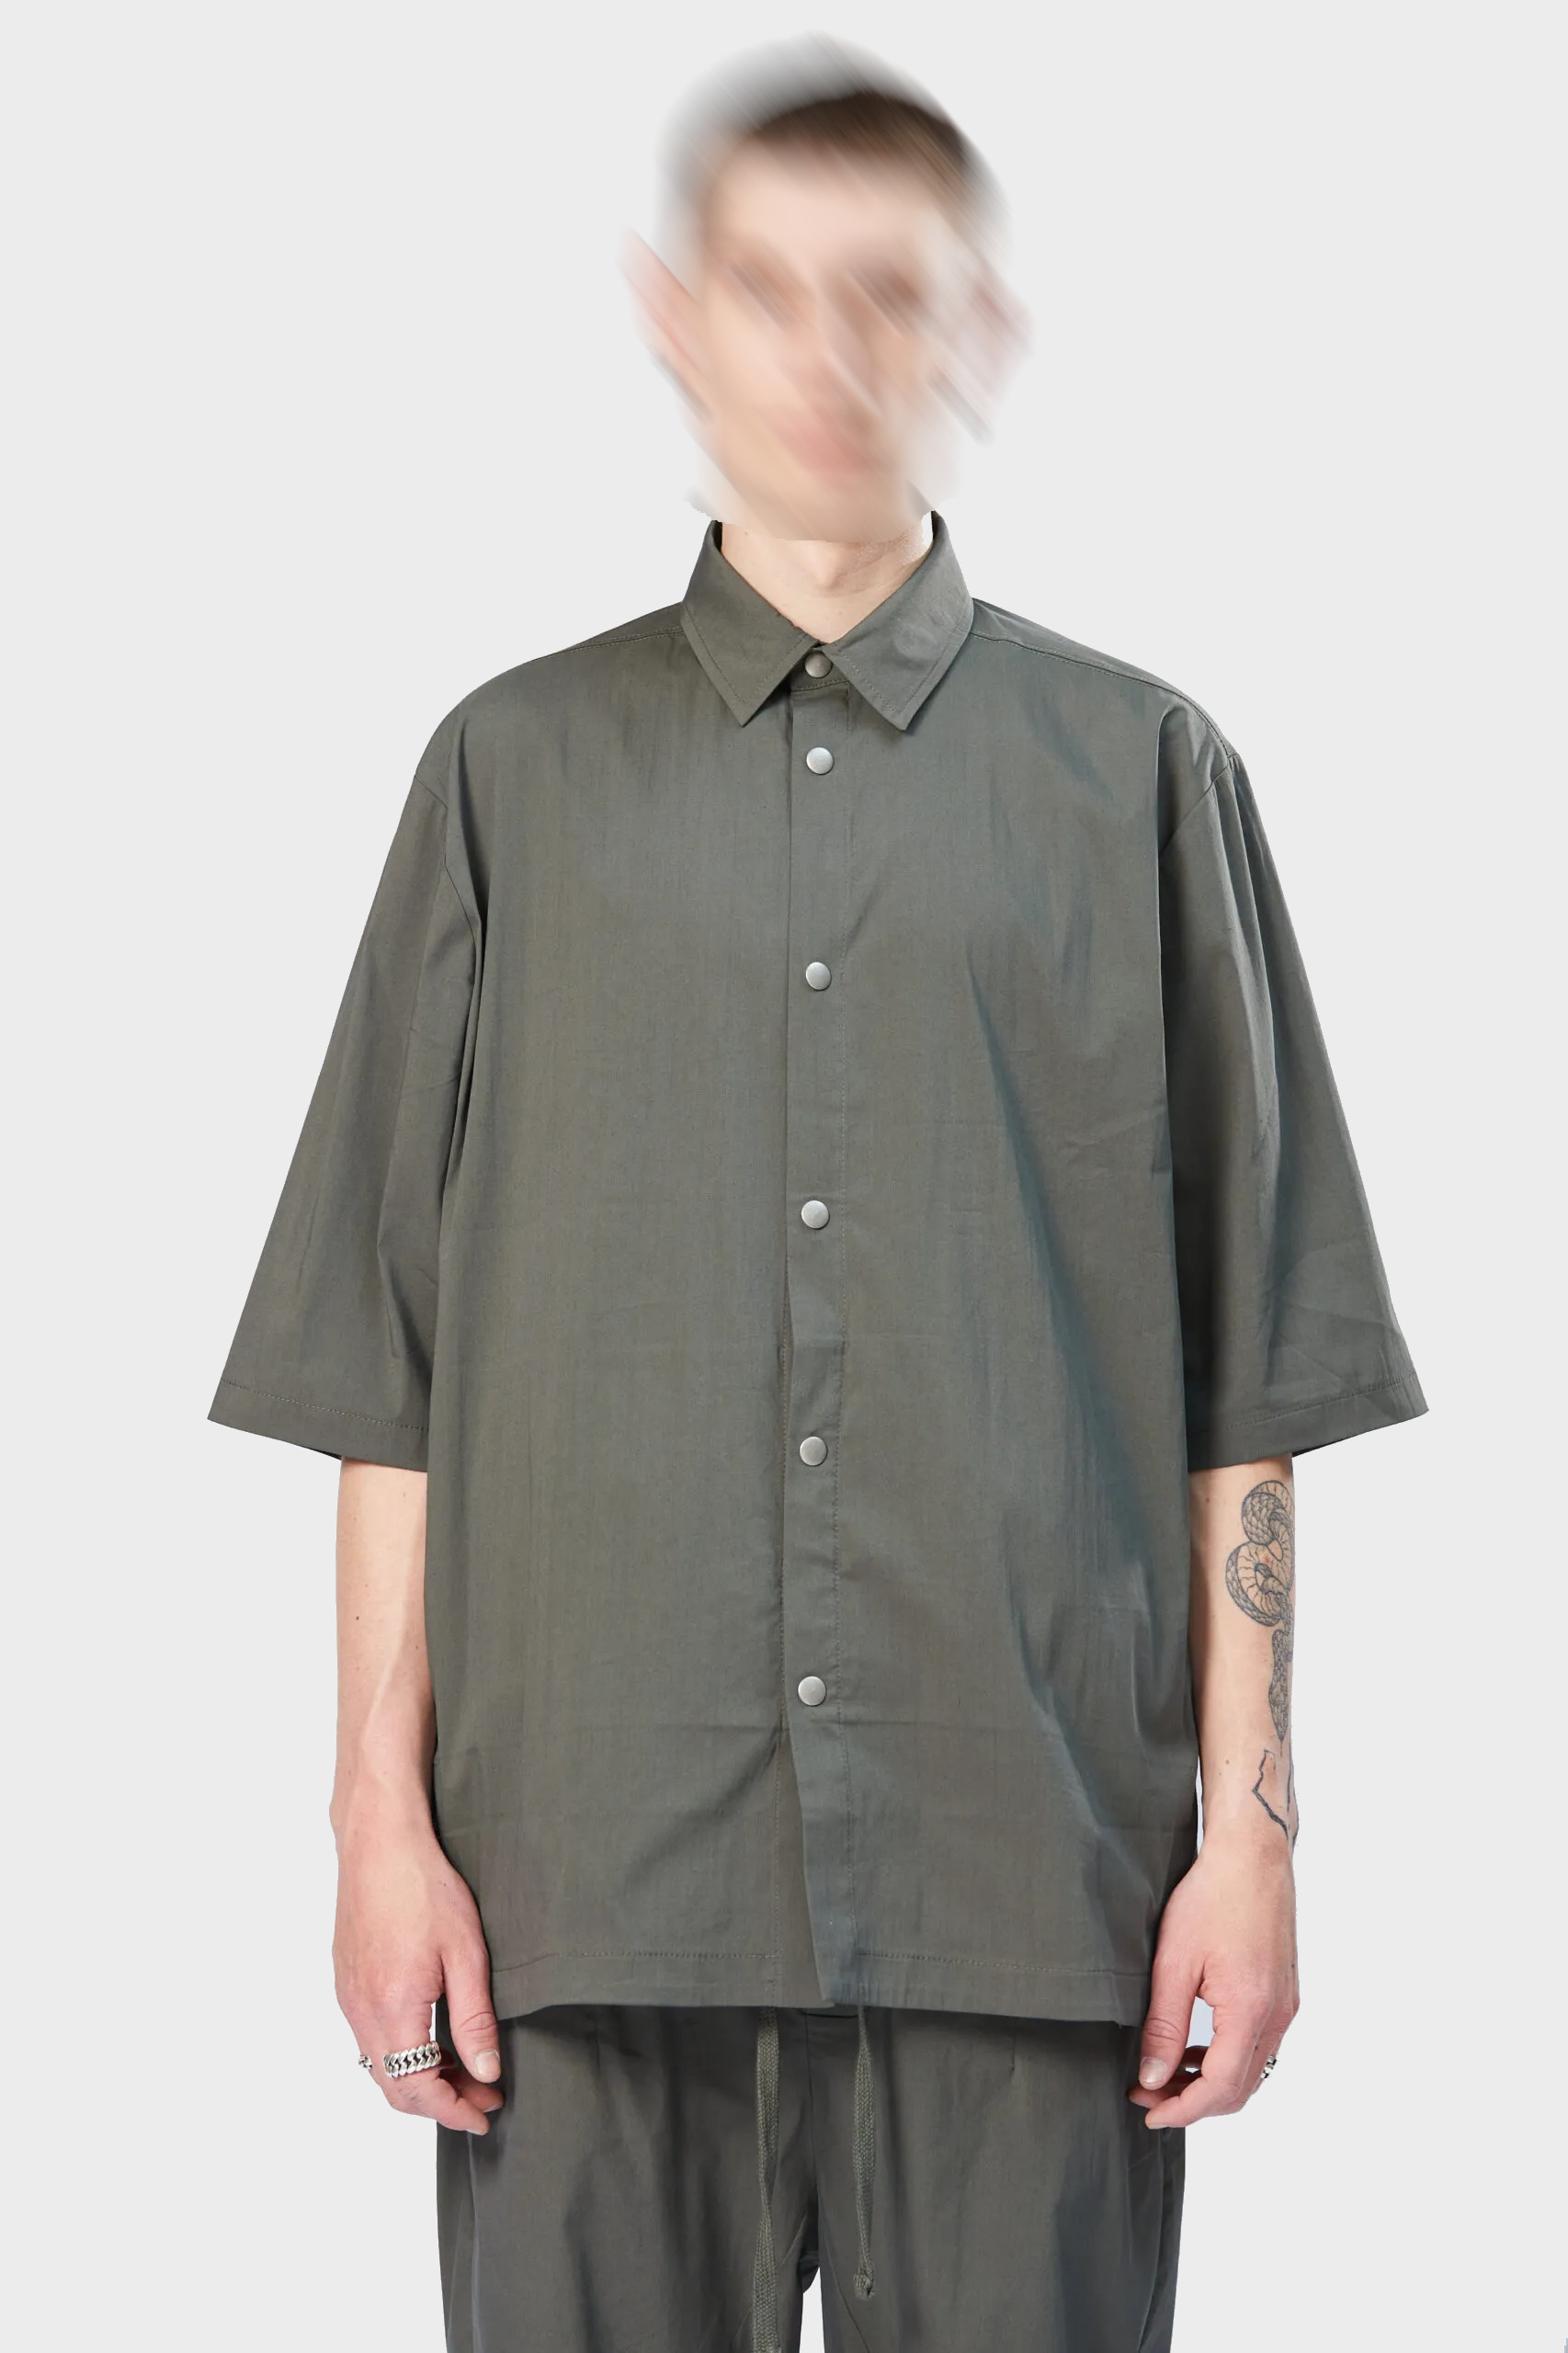 THOM KROM Shirt in Ivy Green S